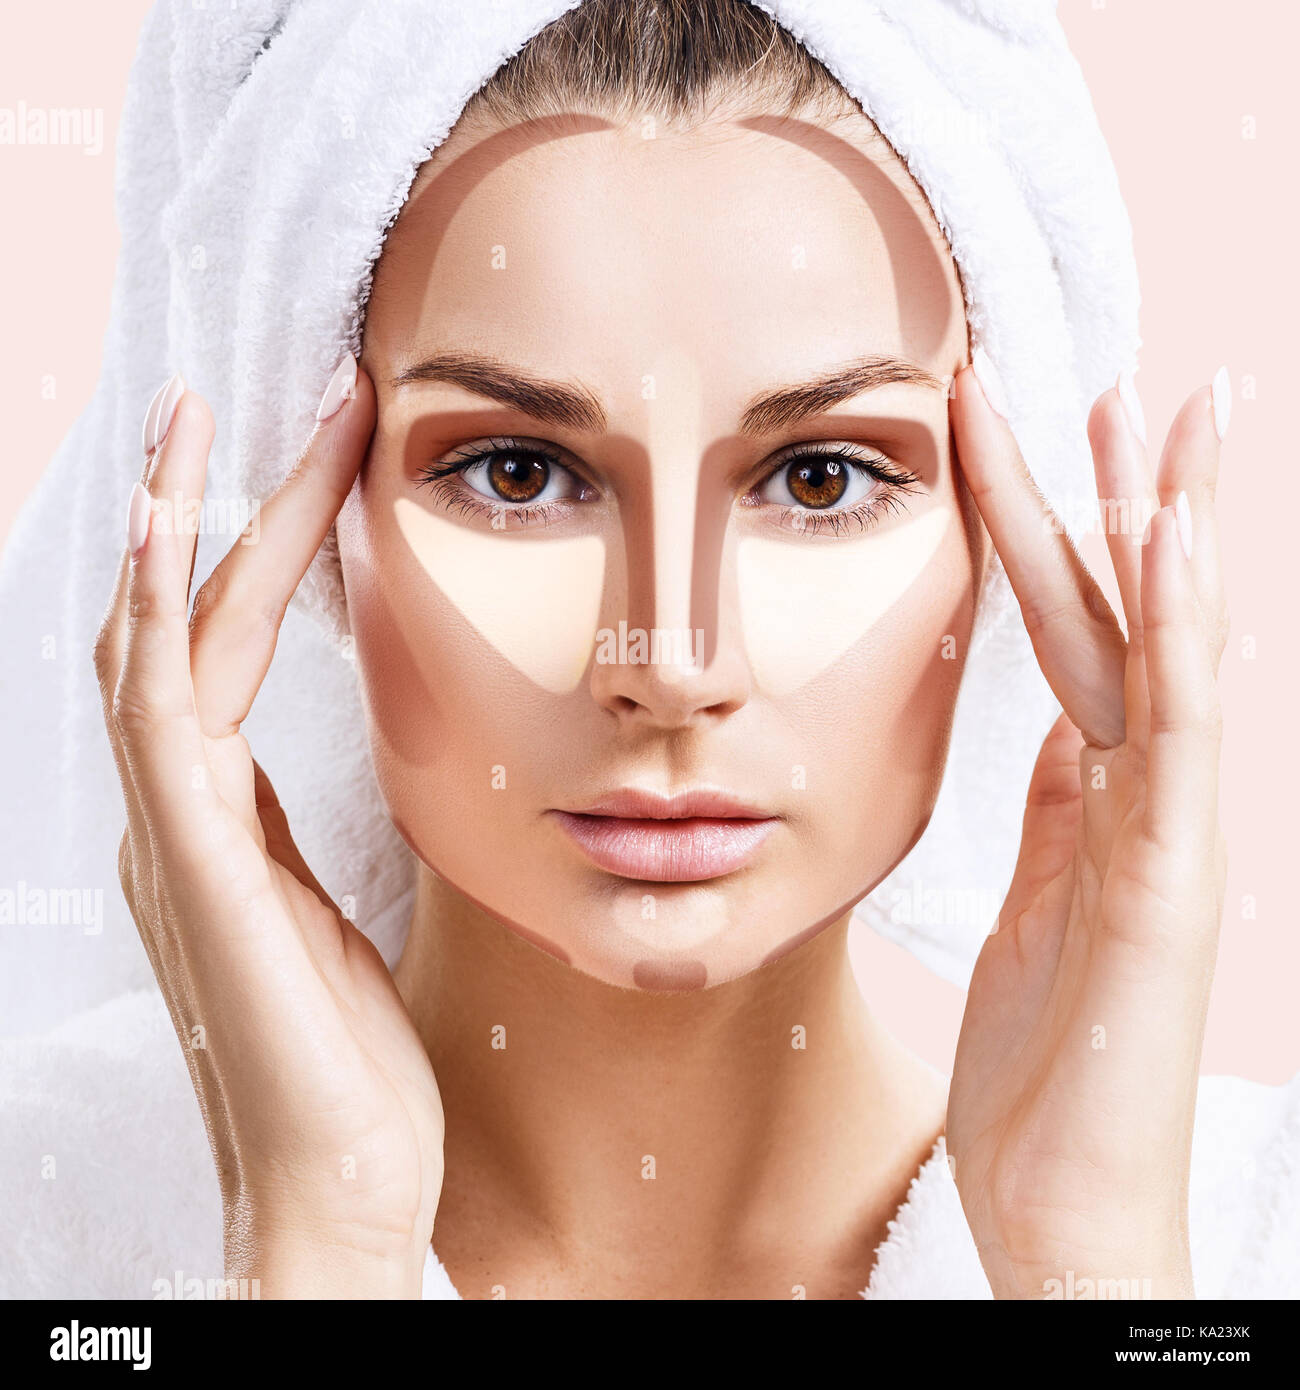 Woman with sample contouring and highlight makeup Stock Photo